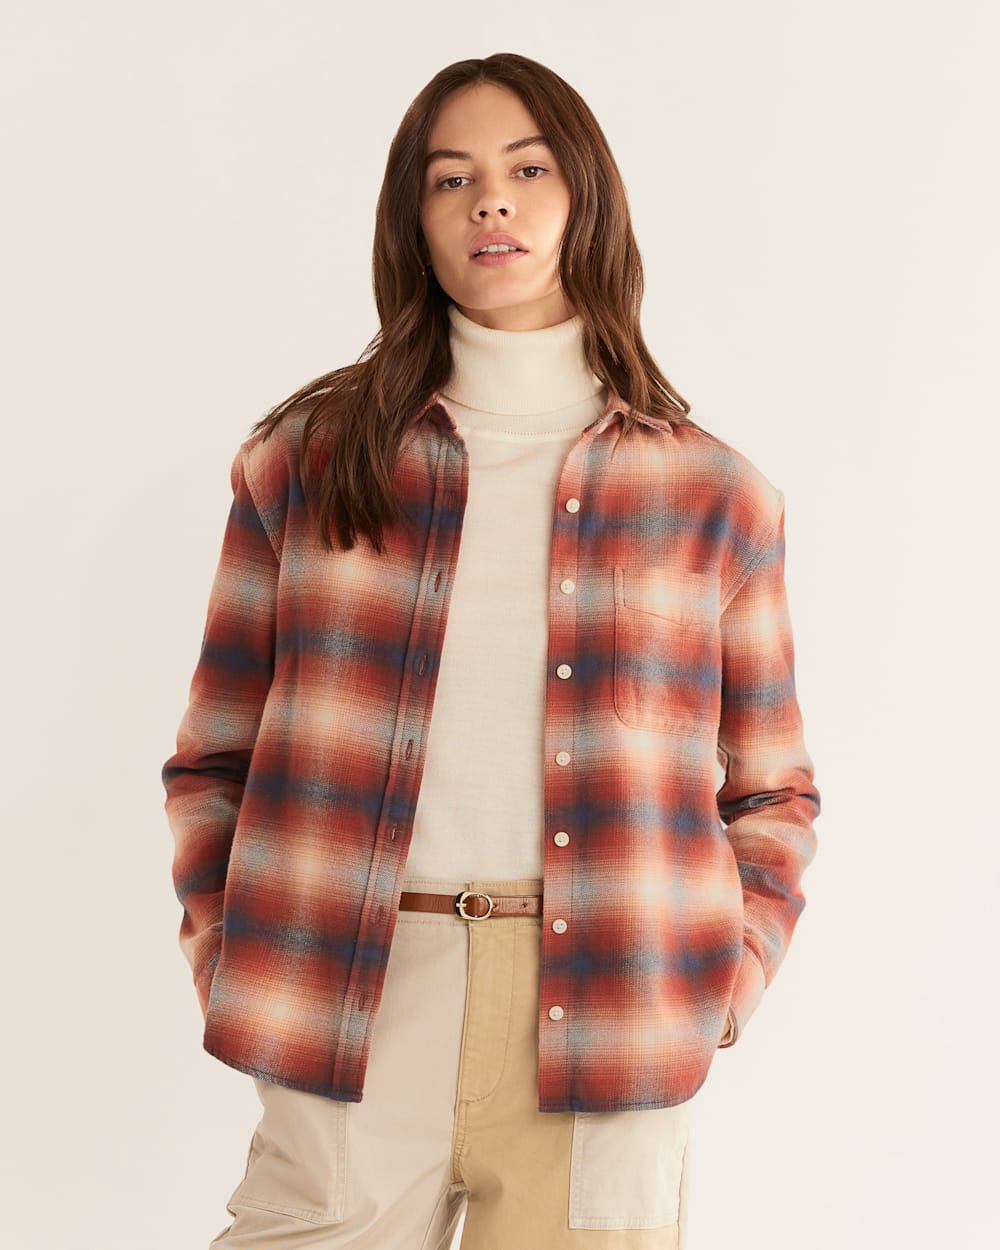 WOMEN'S BOYFRIEND DOUBLE-BRUSHED FLANNEL SHIRT IN RED OCHRE MULTI PLAID image number 1